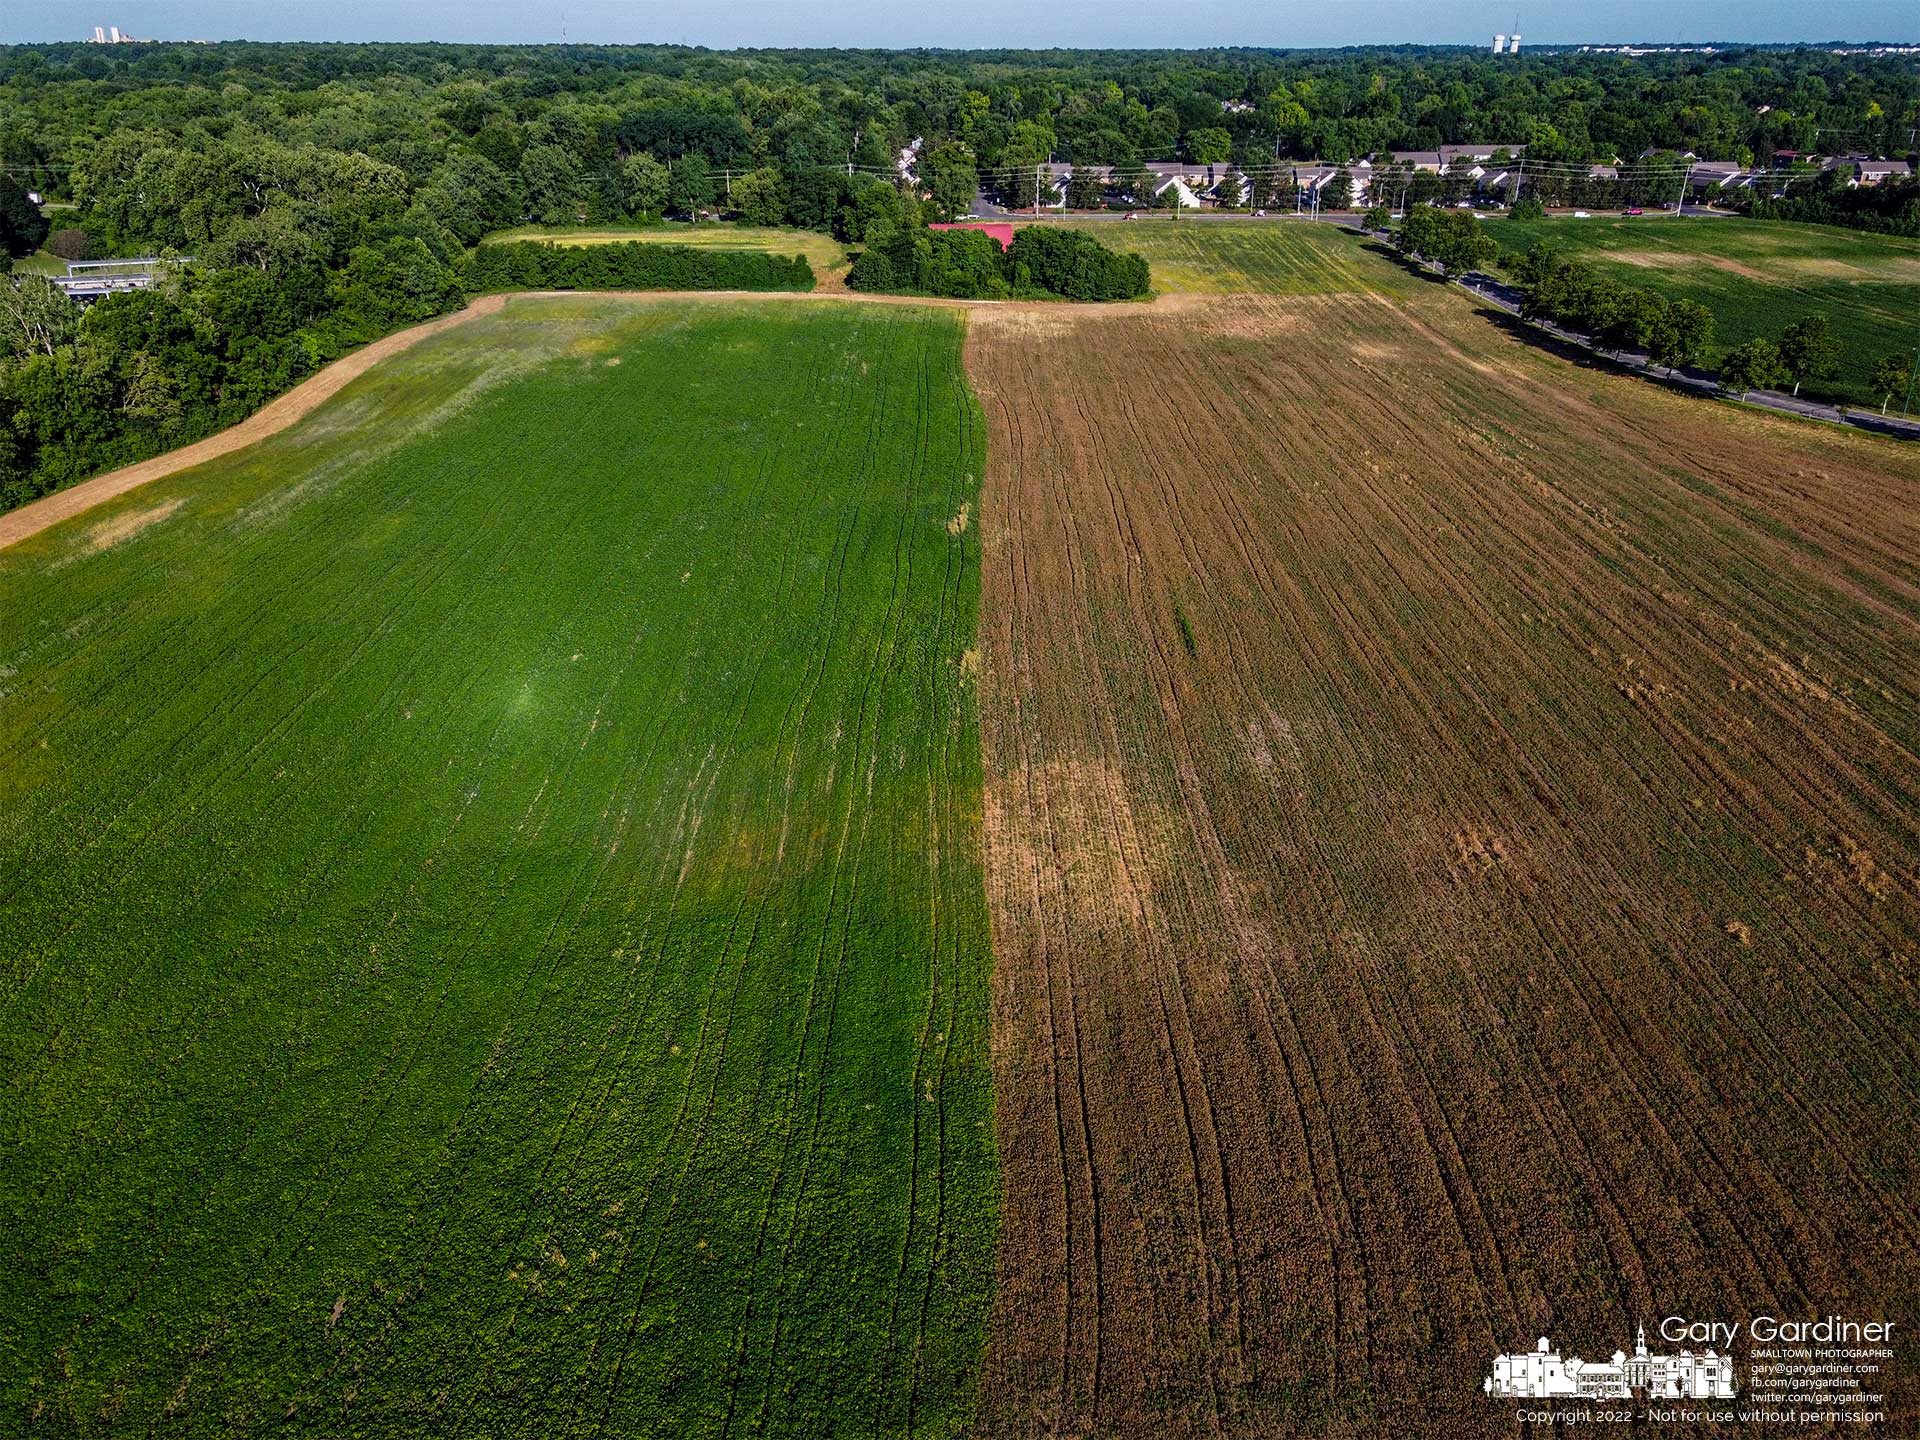 The lower soybean field at the Braun Farms shows the effect of an application of weedkiller compared to a section of the field without spraying. My Final Photo for June 27, 2022.